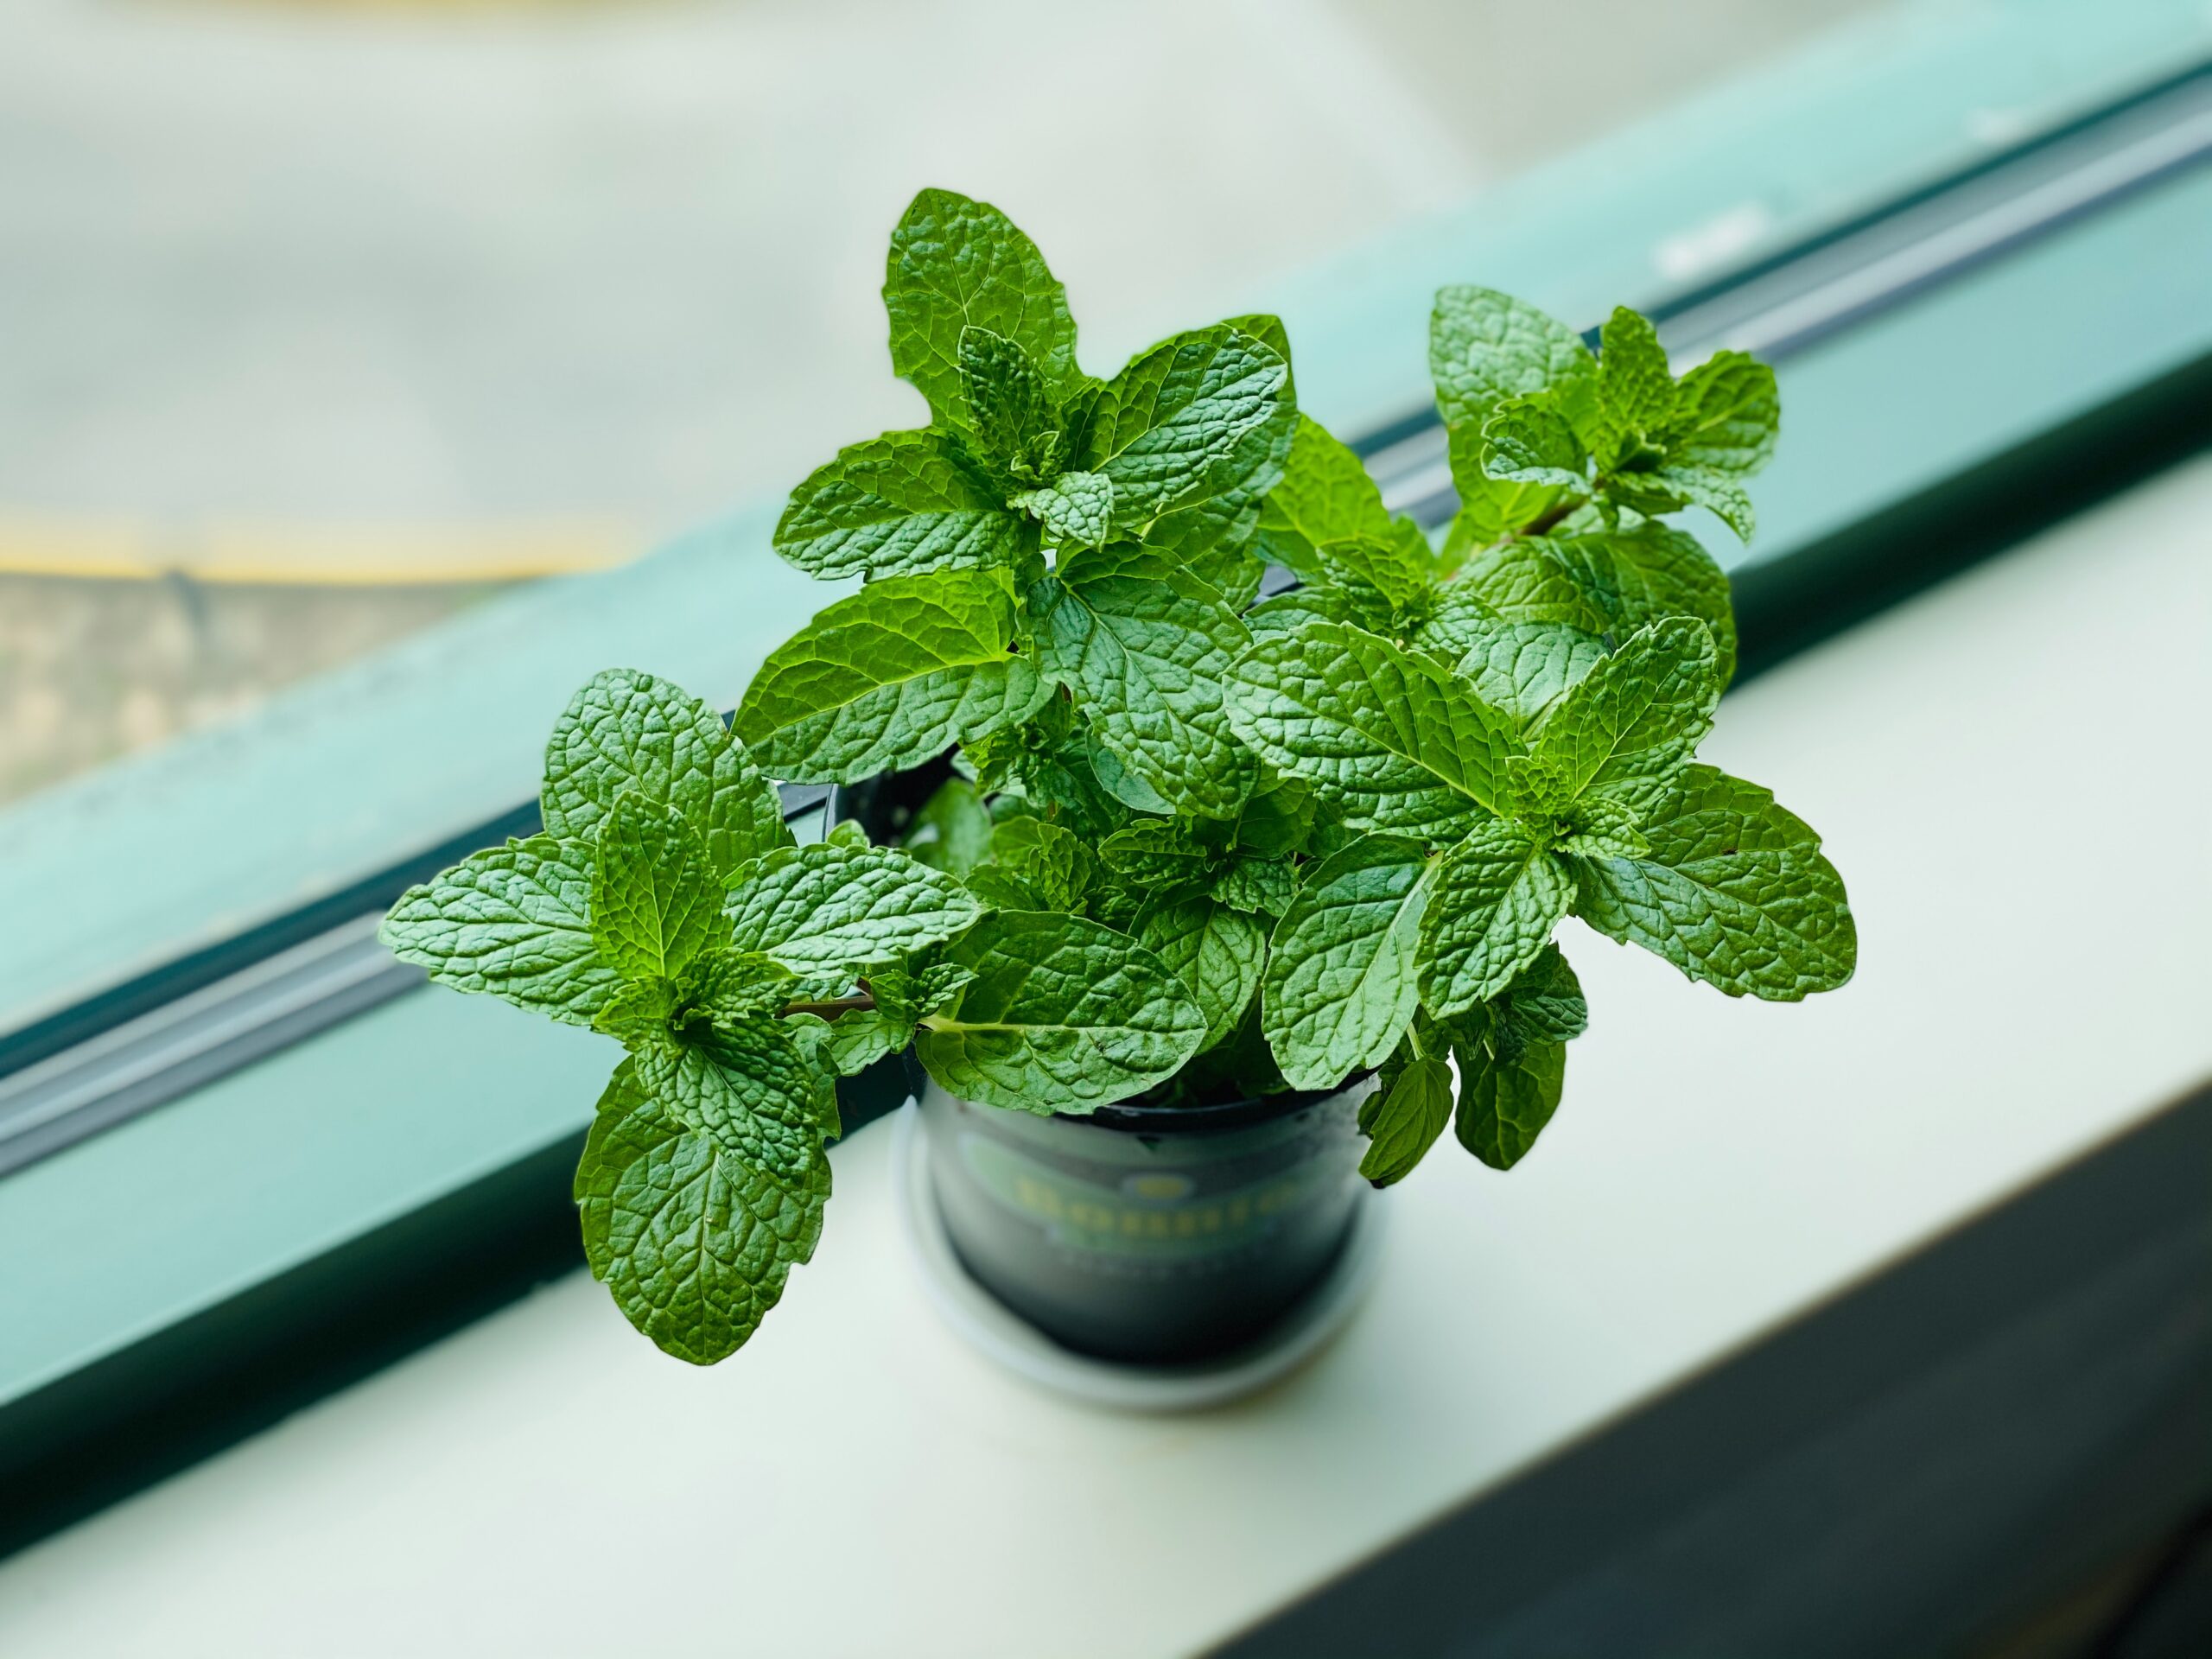 Use this plant for your tea, cocktails, and to deter flies. Pictured: A pot with mint beside a window.